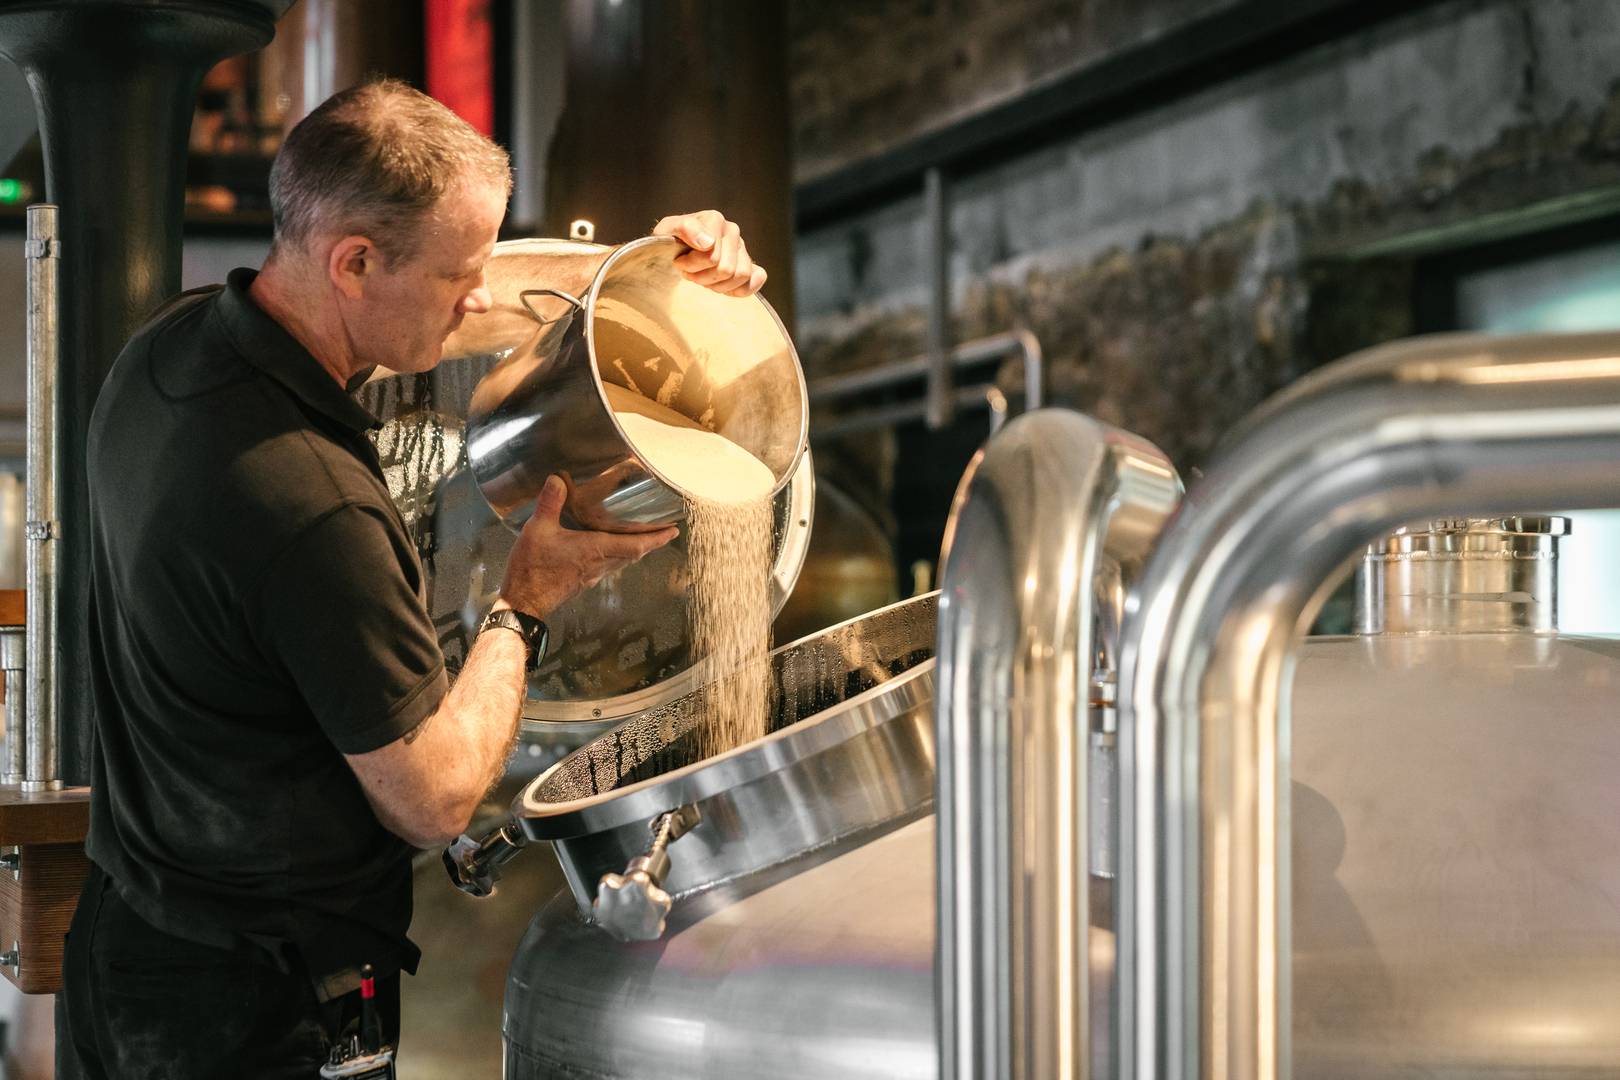 Rub shoulders with our distillers busy making our whisky.